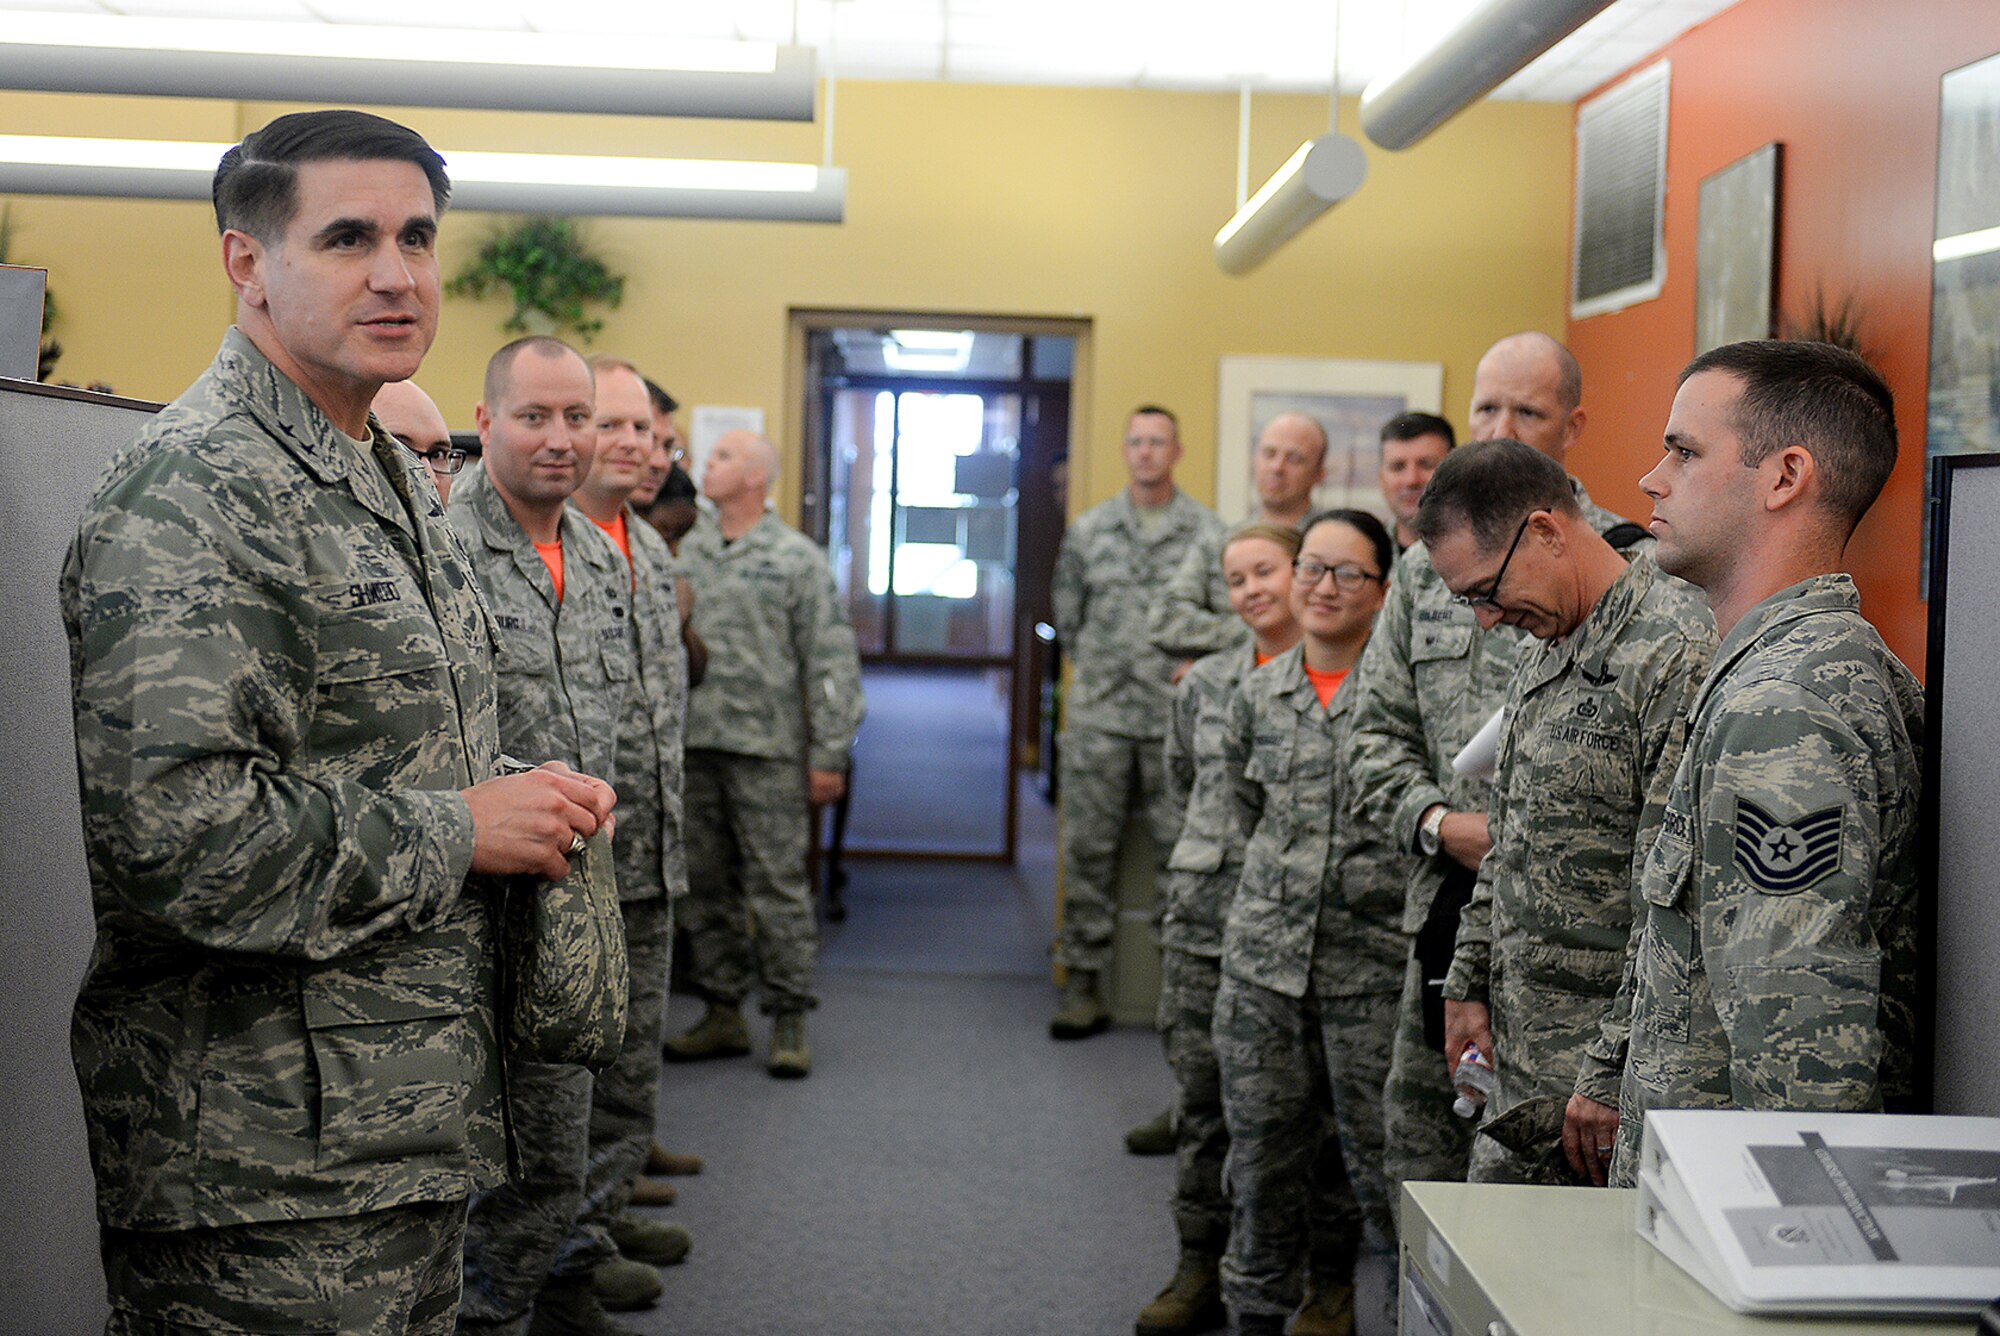 U.S. Air Force Maj. Gen. Bradford Shwedo, 25th Air Force commander, talks with Airmen of the 55th Comptroller Squadron during his visit to Offutt Air Force Base, Neb. Oct. 14. Shwedo met with wing leadership and visited several facilities on base to thank members of Team Offutt for their duty. (U.S. Air Force photo by Zachary Hada/Released)